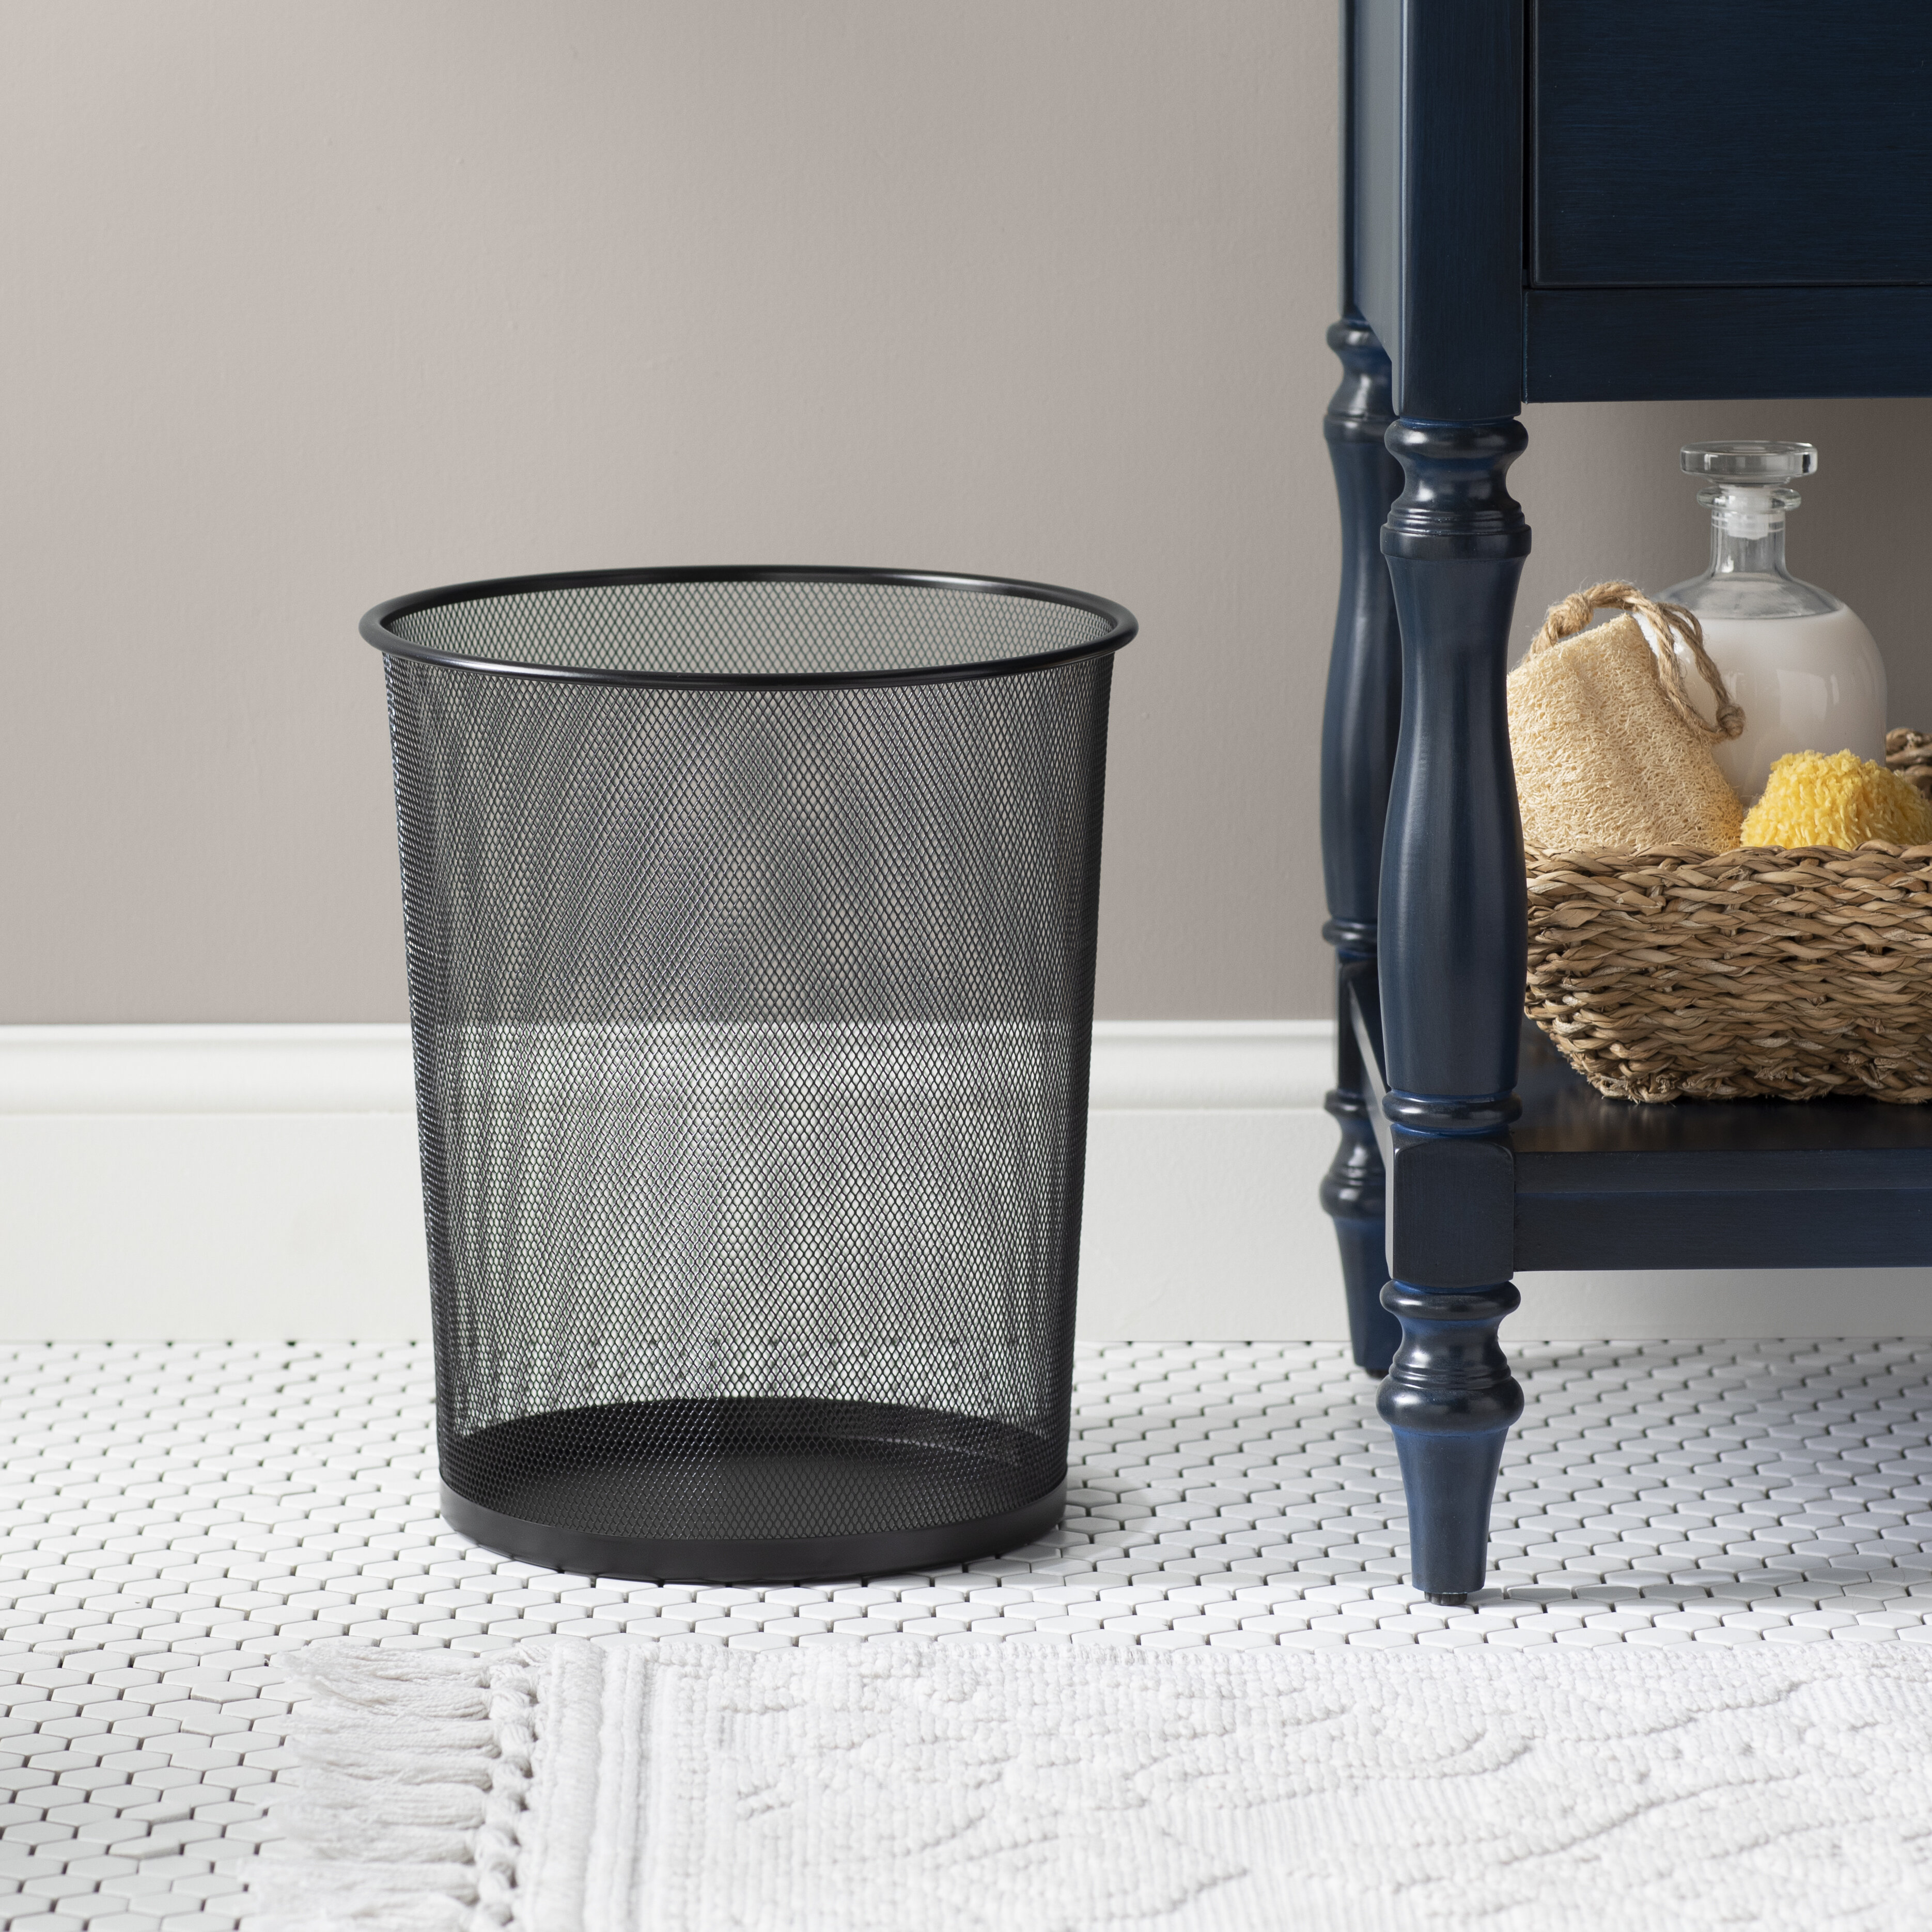 6L Ultra Thin Bathroom Trash Bin With Toilet Holder Tissue Grocery Bag  Storage Organization Garbage Cans Save Space Bucket Sets